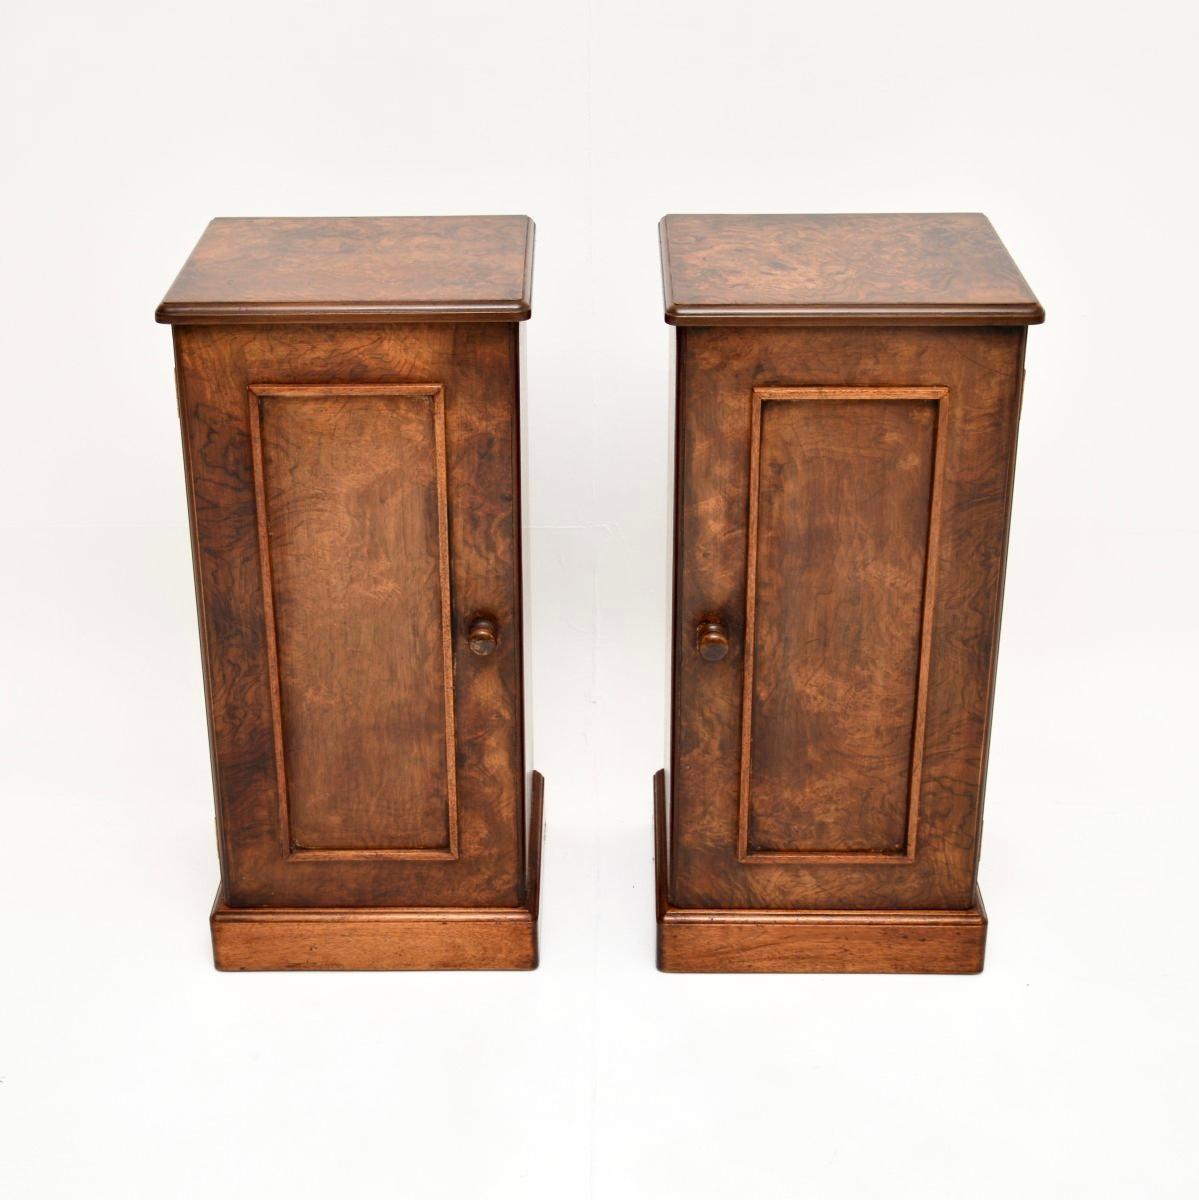 A smart and beautifully made pair of antique burr walnut bedside cabinets. They were made in England, they are in the Victorian style and date from around the 1930’s.

The quality is outstanding, they are a useful slim size, with plenty of storage